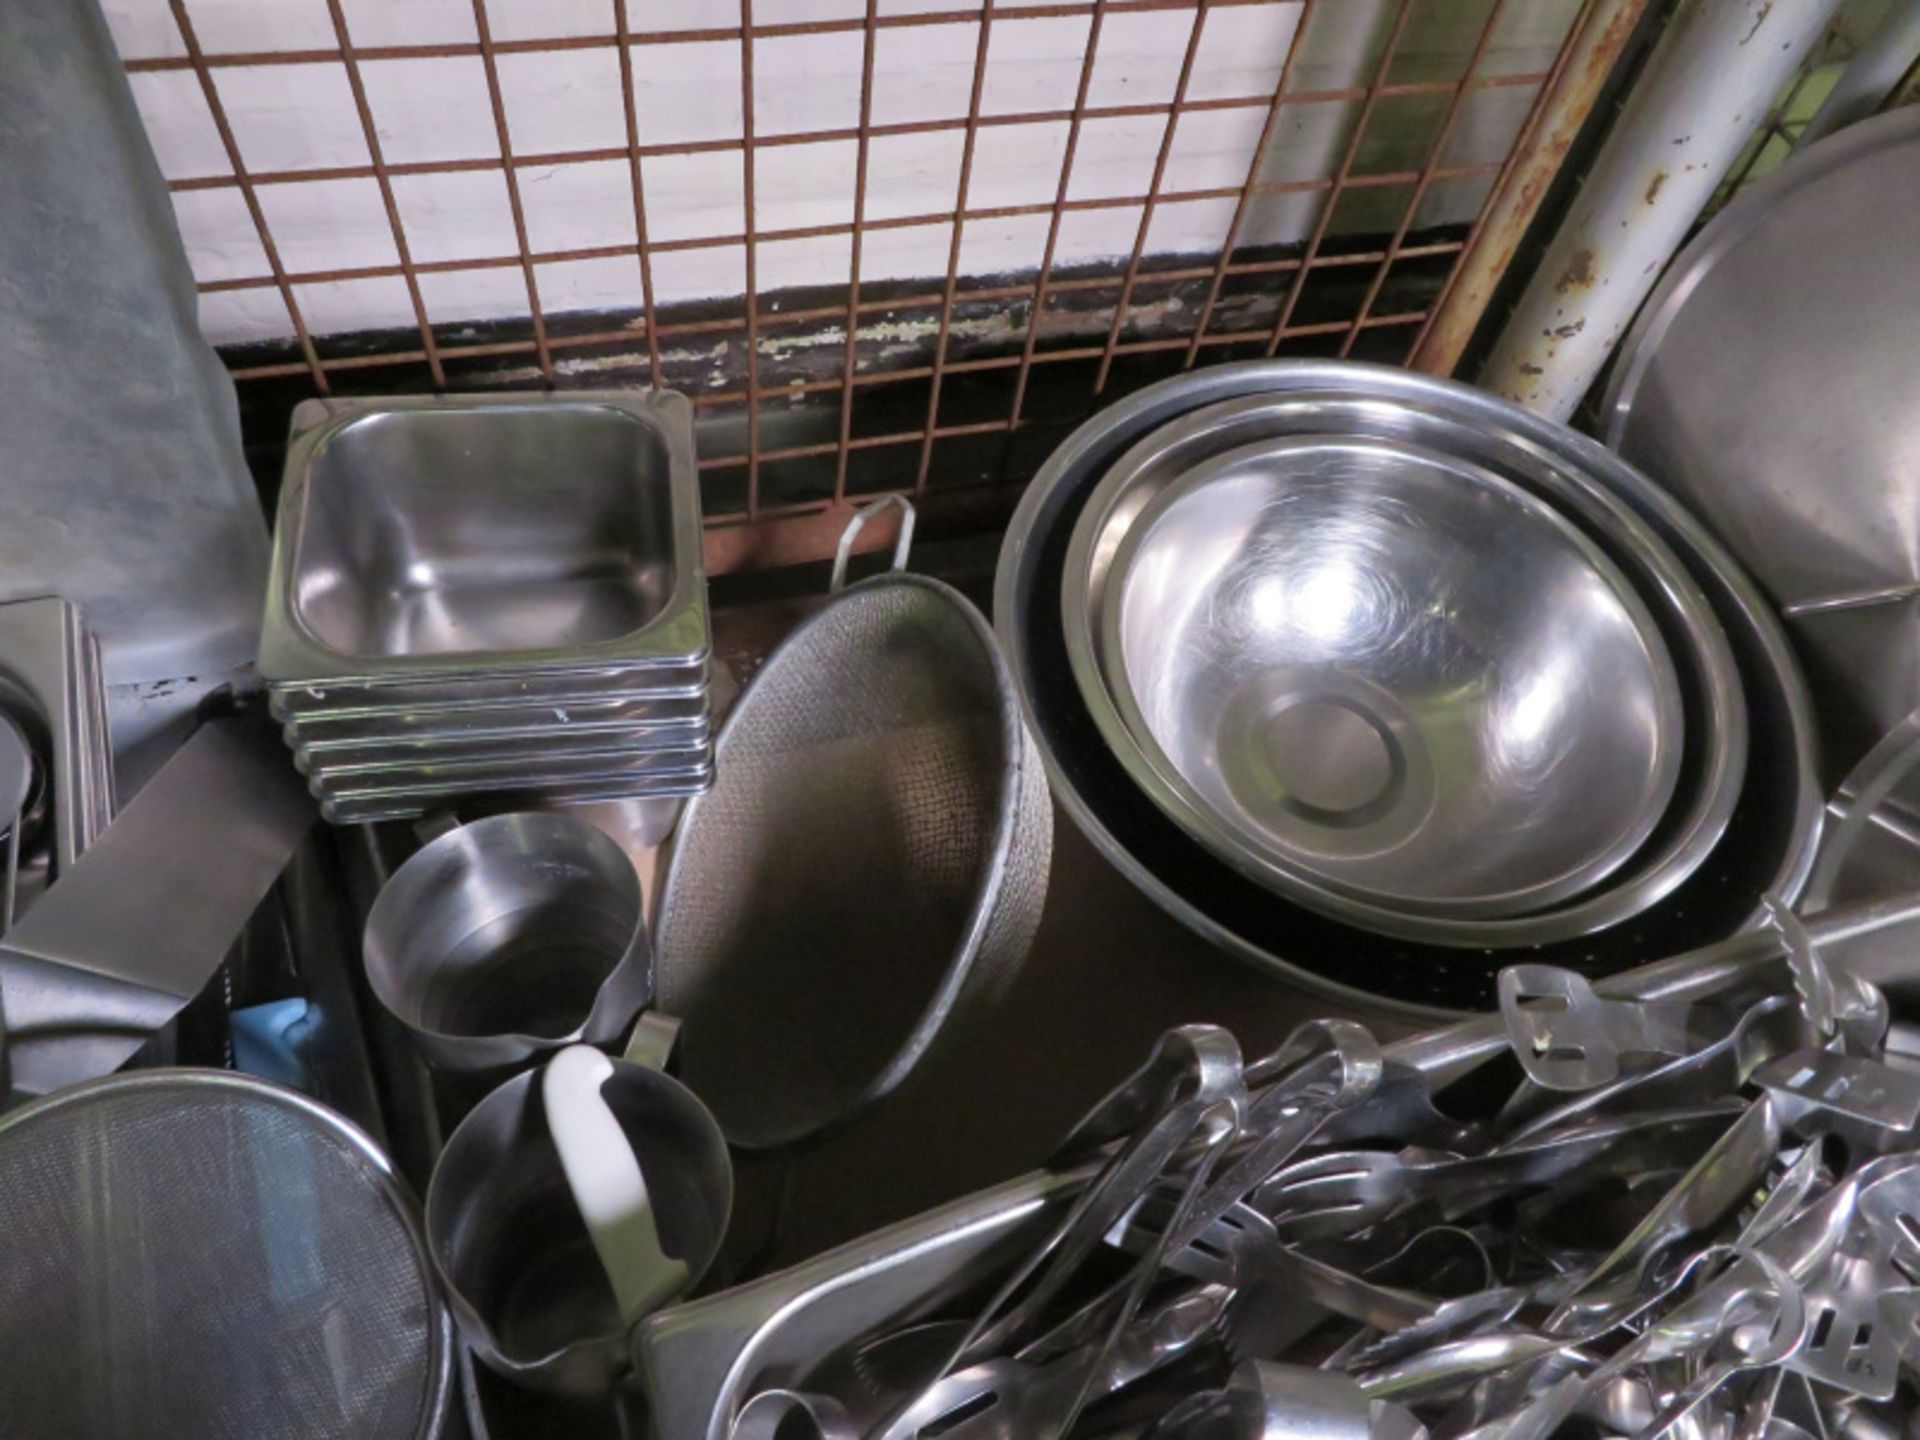 Stainless Steel Catering Equipment - gastronorm pans, cooking pot, shelf, pans, mixing bowls & more - Image 6 of 6